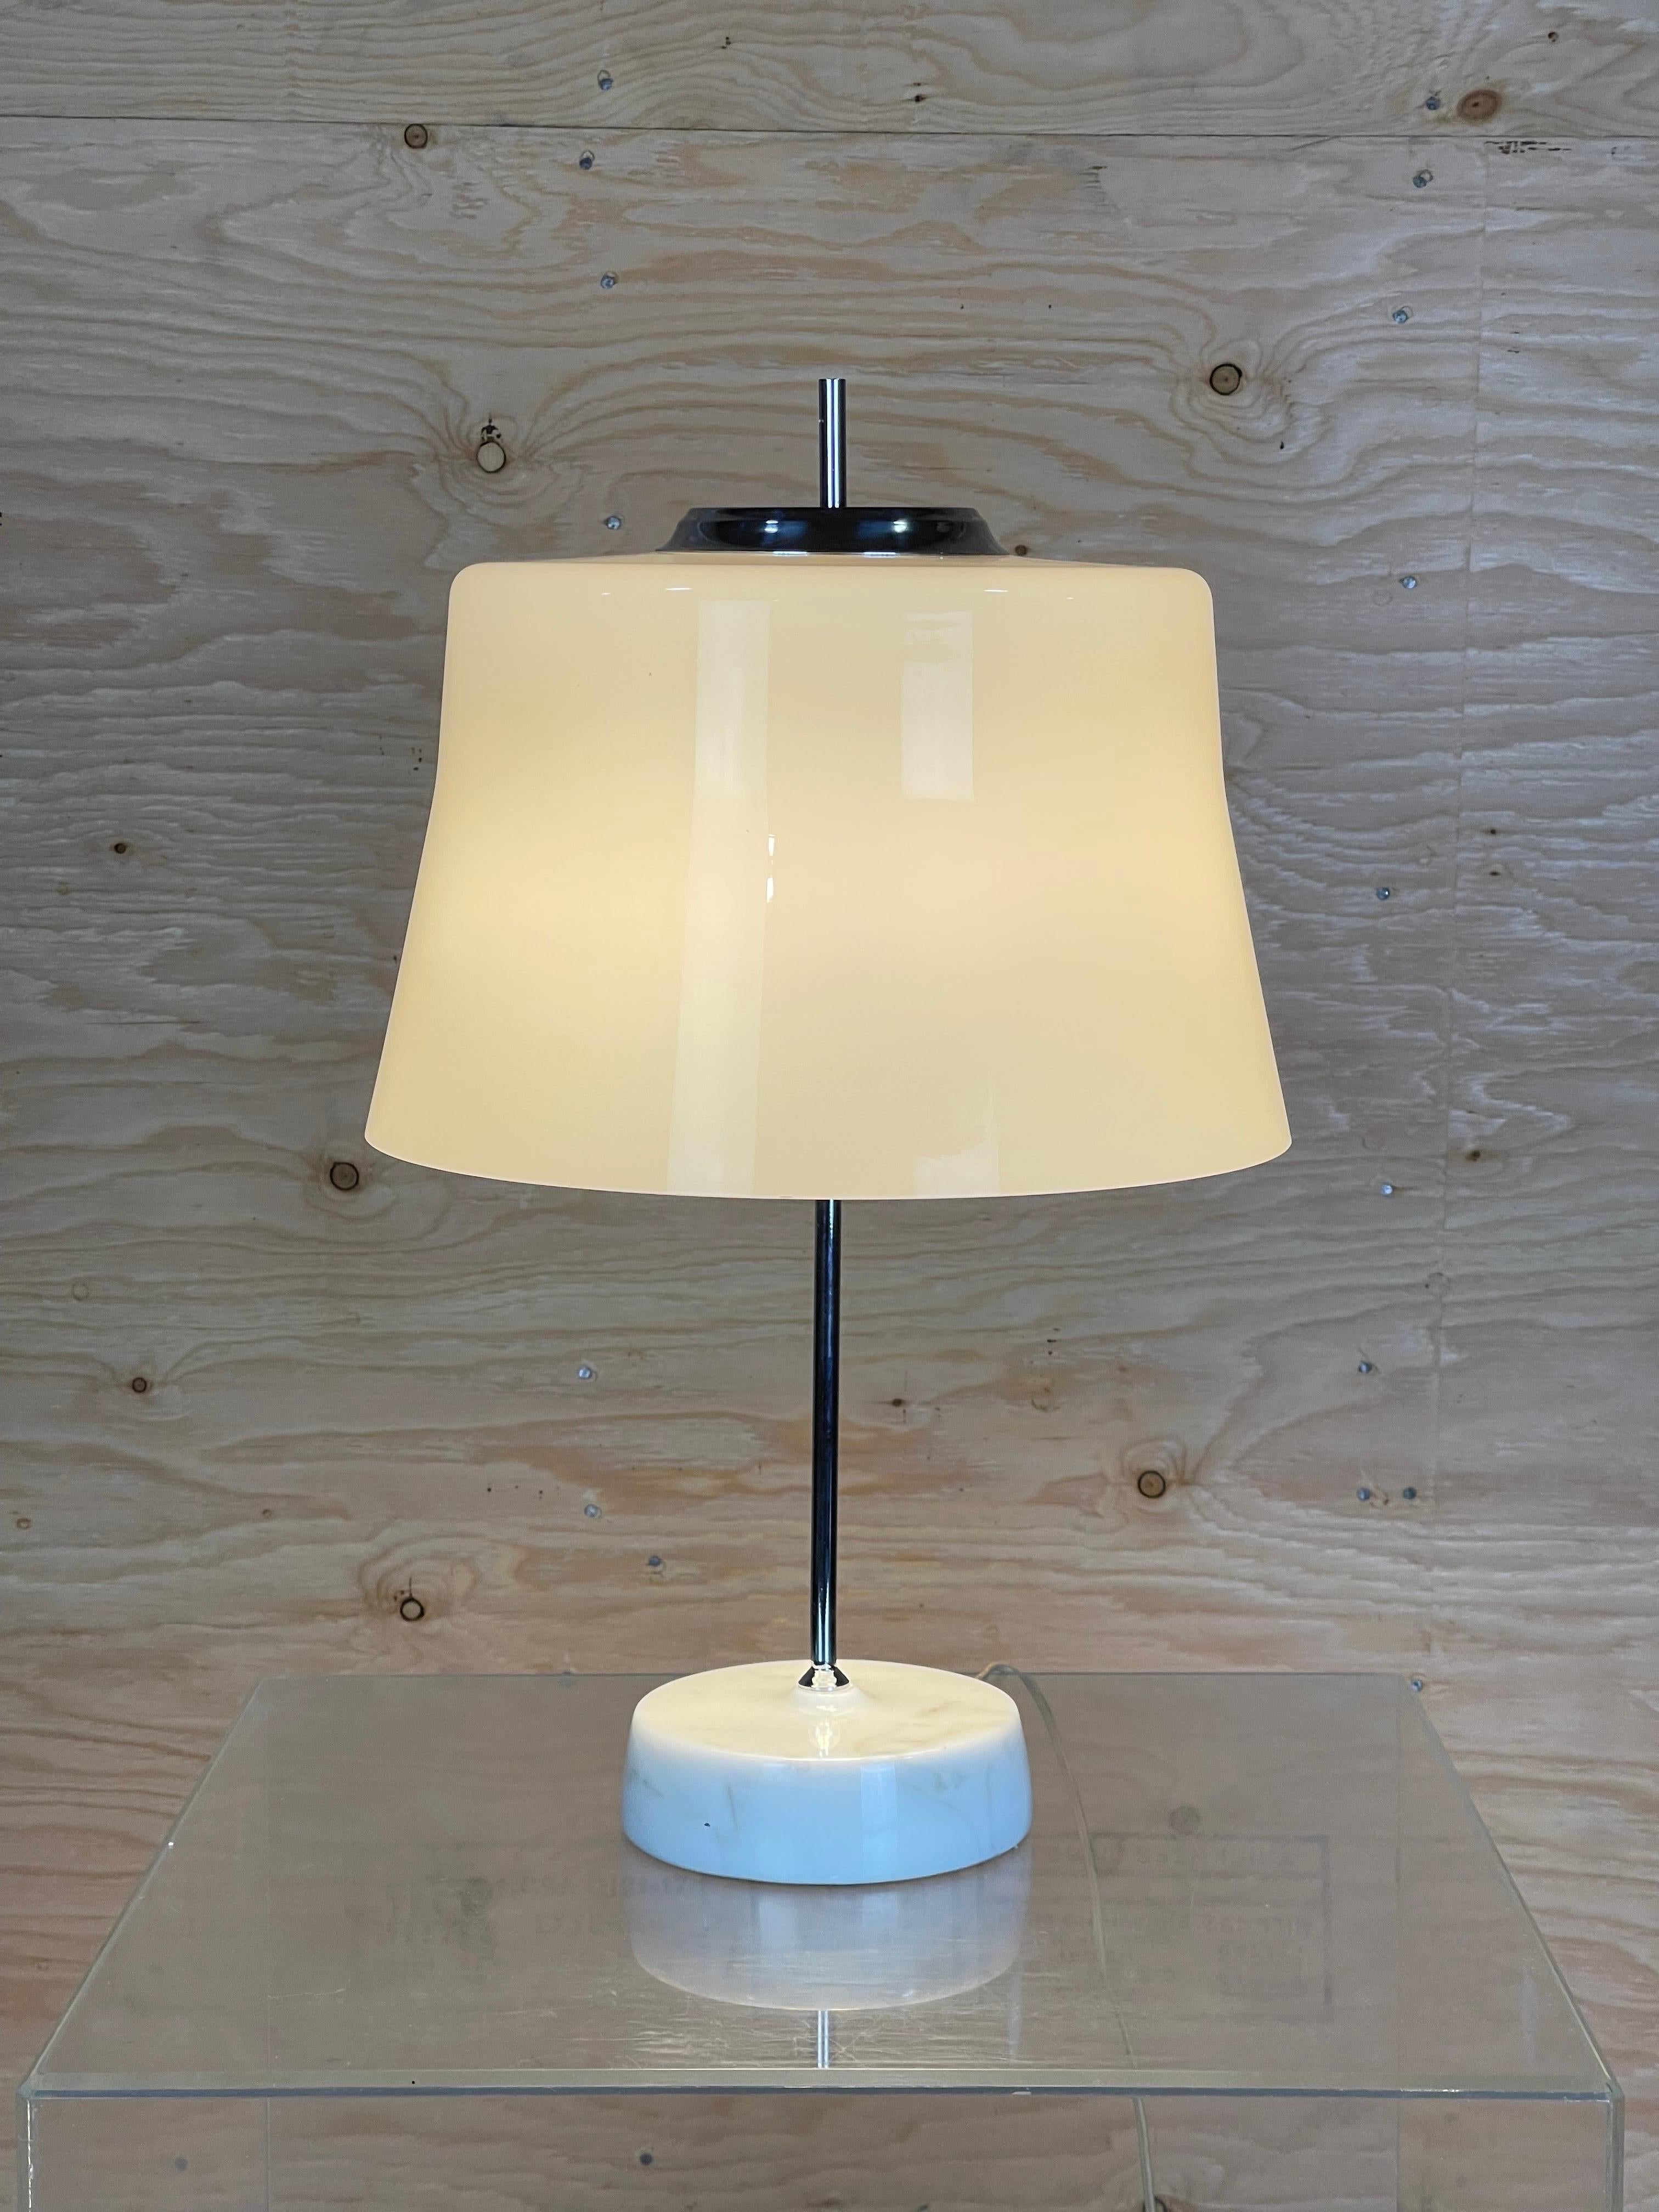 Beautiful and rare table lamp atttributed Angelo Lelli for Arredoluce. The light consists of a round thick marble base which curves right up to the chrome base. The grey glass draped shade is made of two layers of handblown glass. The grey toned